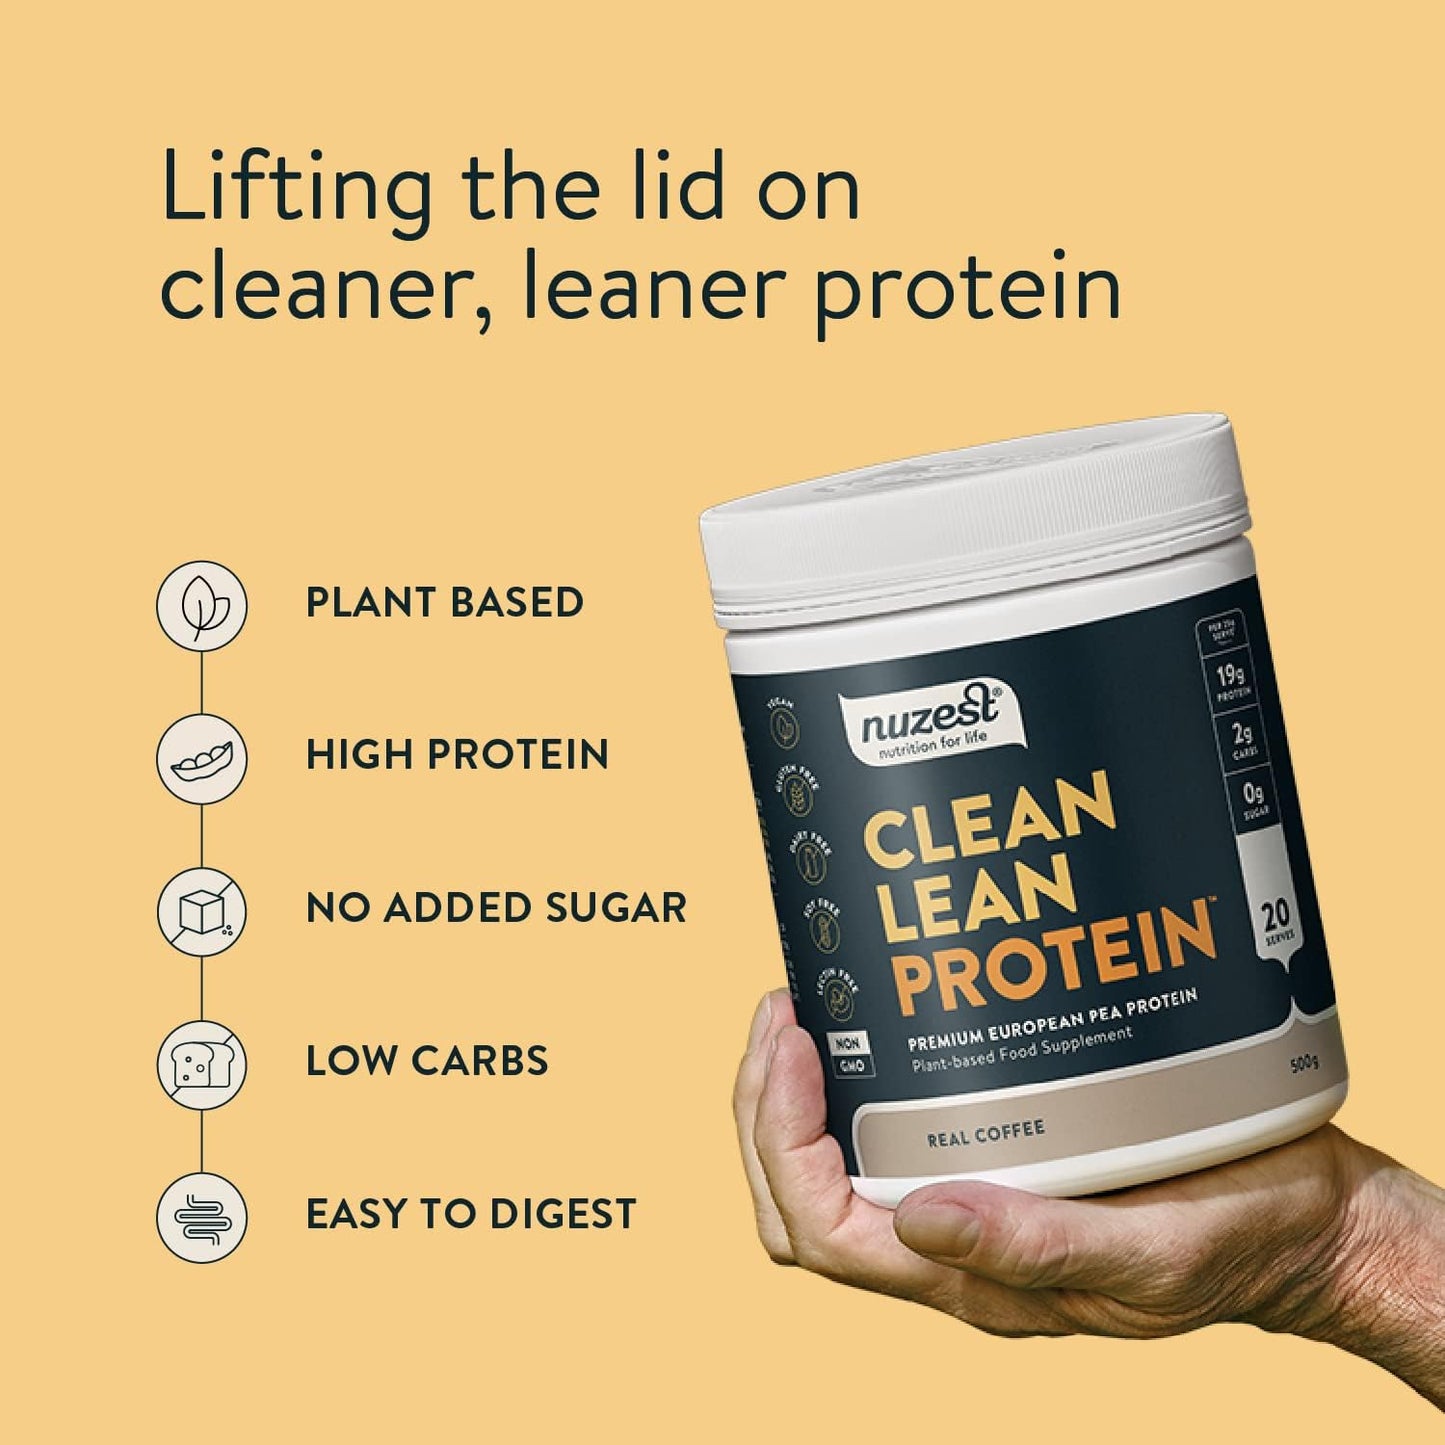 Clean Lean Protein - Real Coffee 500g